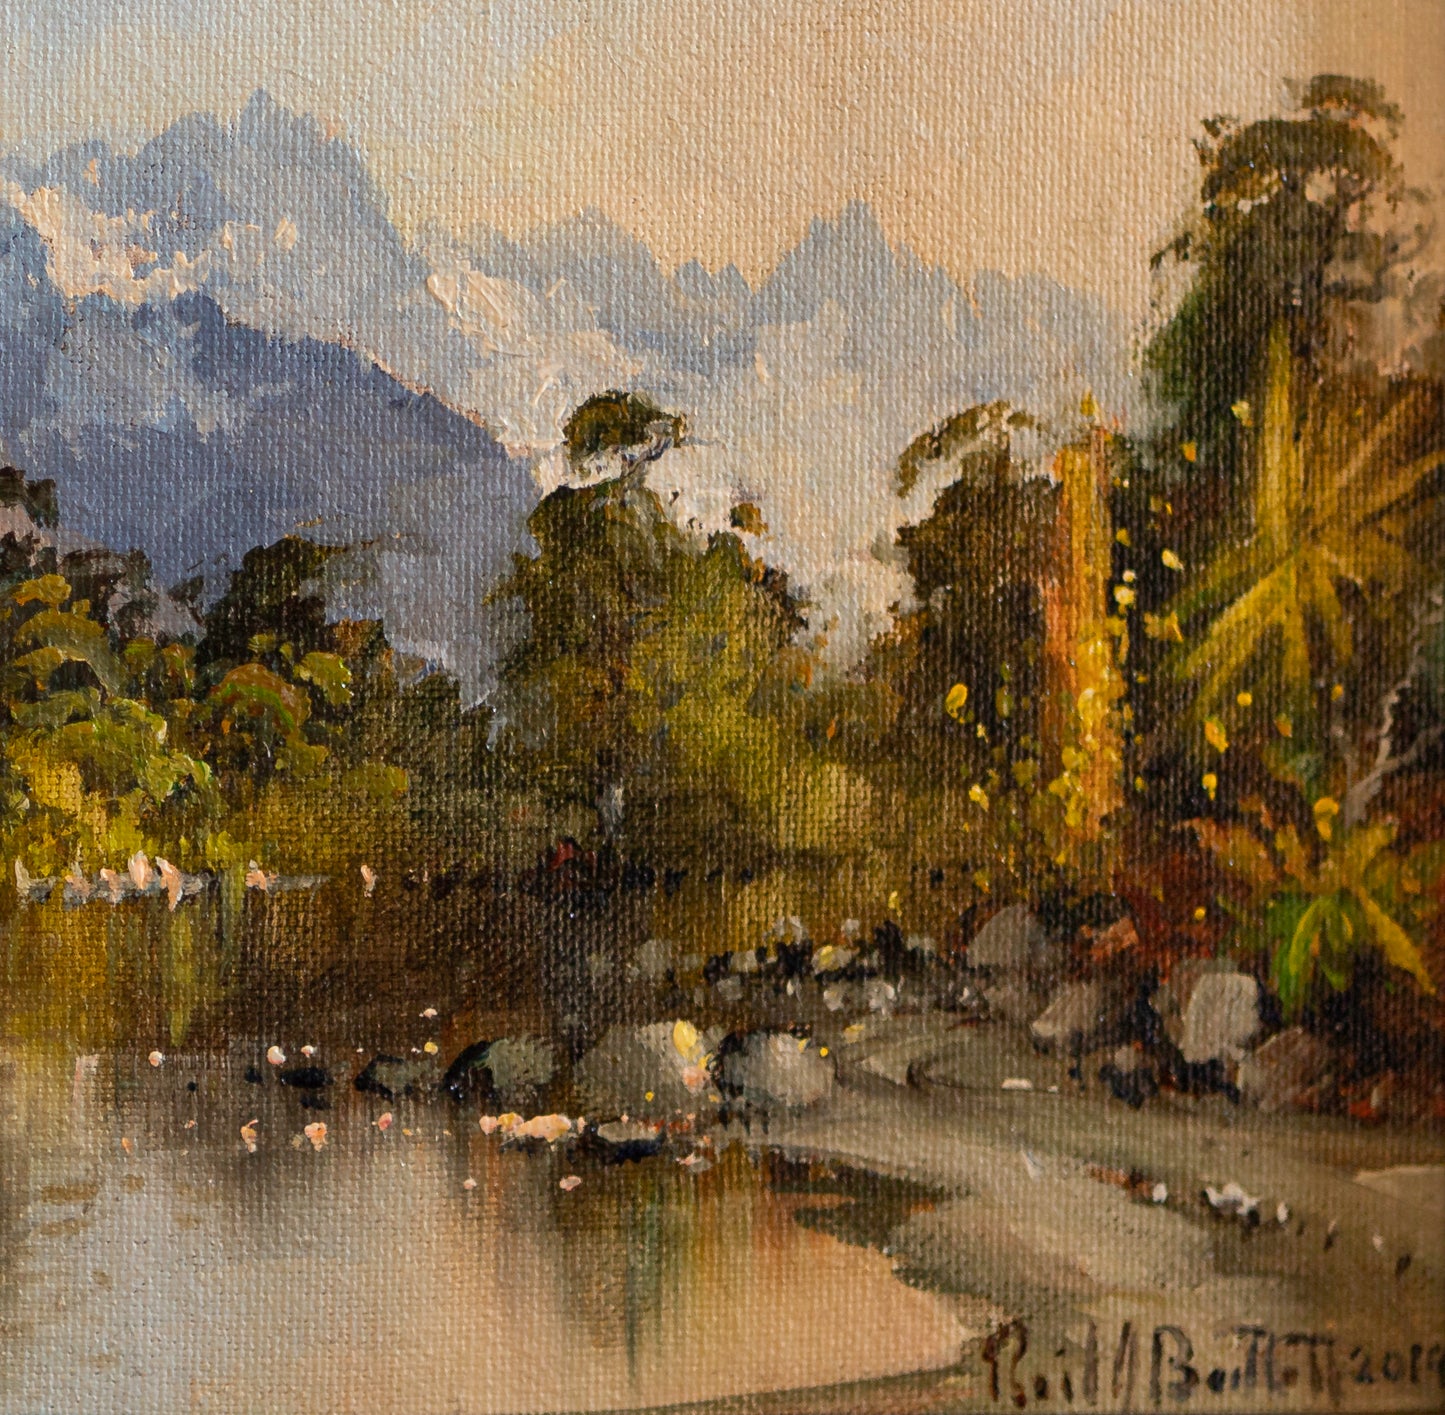 Partial detail of Framed Oil Painting by renowned landscape artist Neil J Bartlett of Glenorchy Lake Wakatipu NZ Silver Fern Gallery